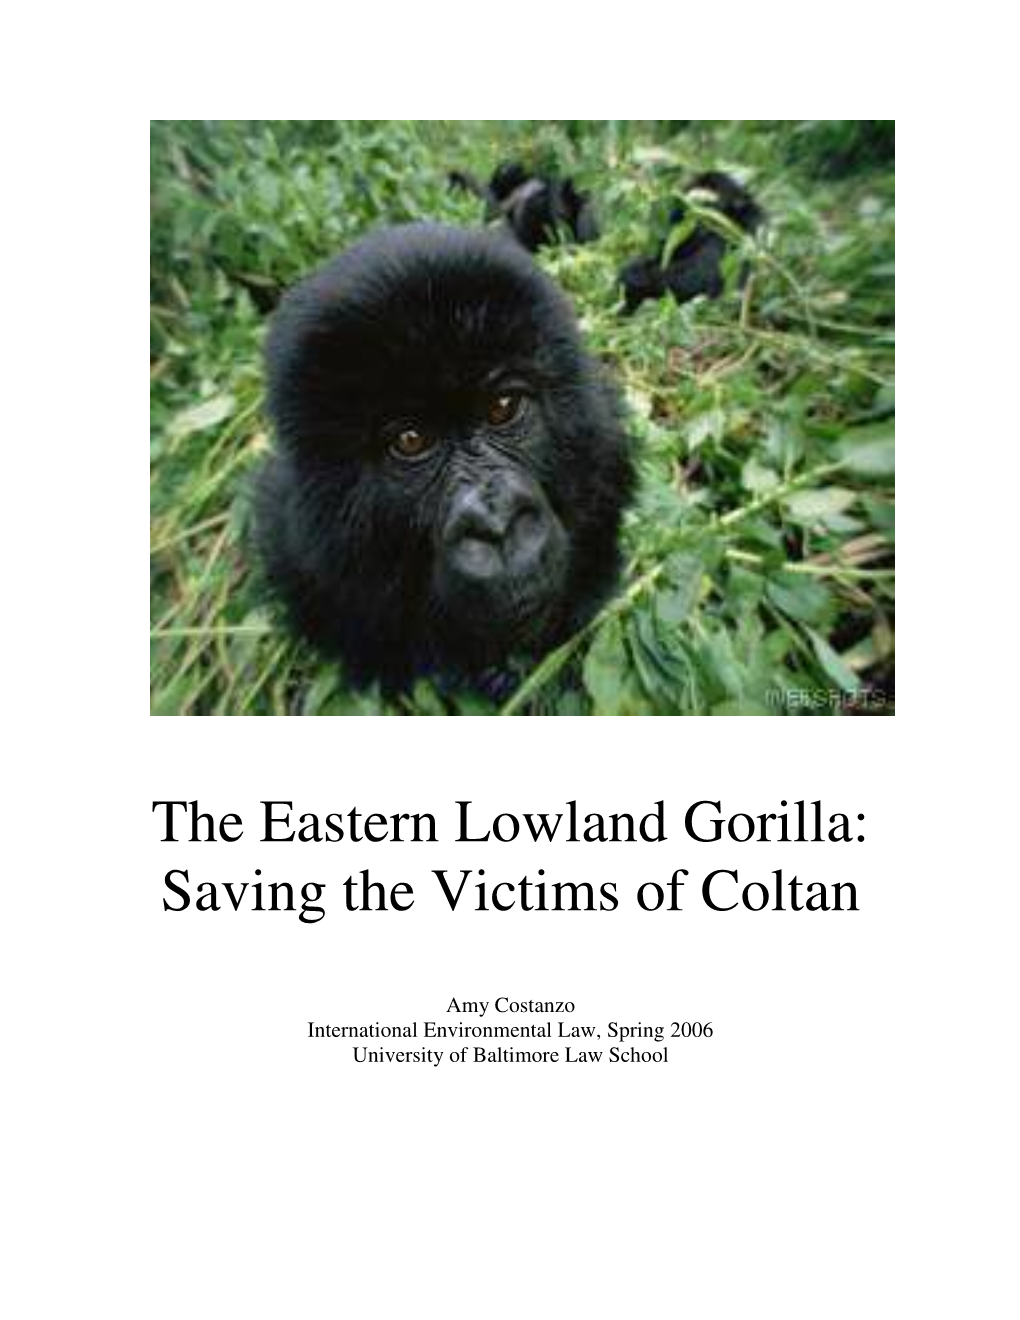 The Eastern Lowland Gorilla: Saving the Victims of Coltan